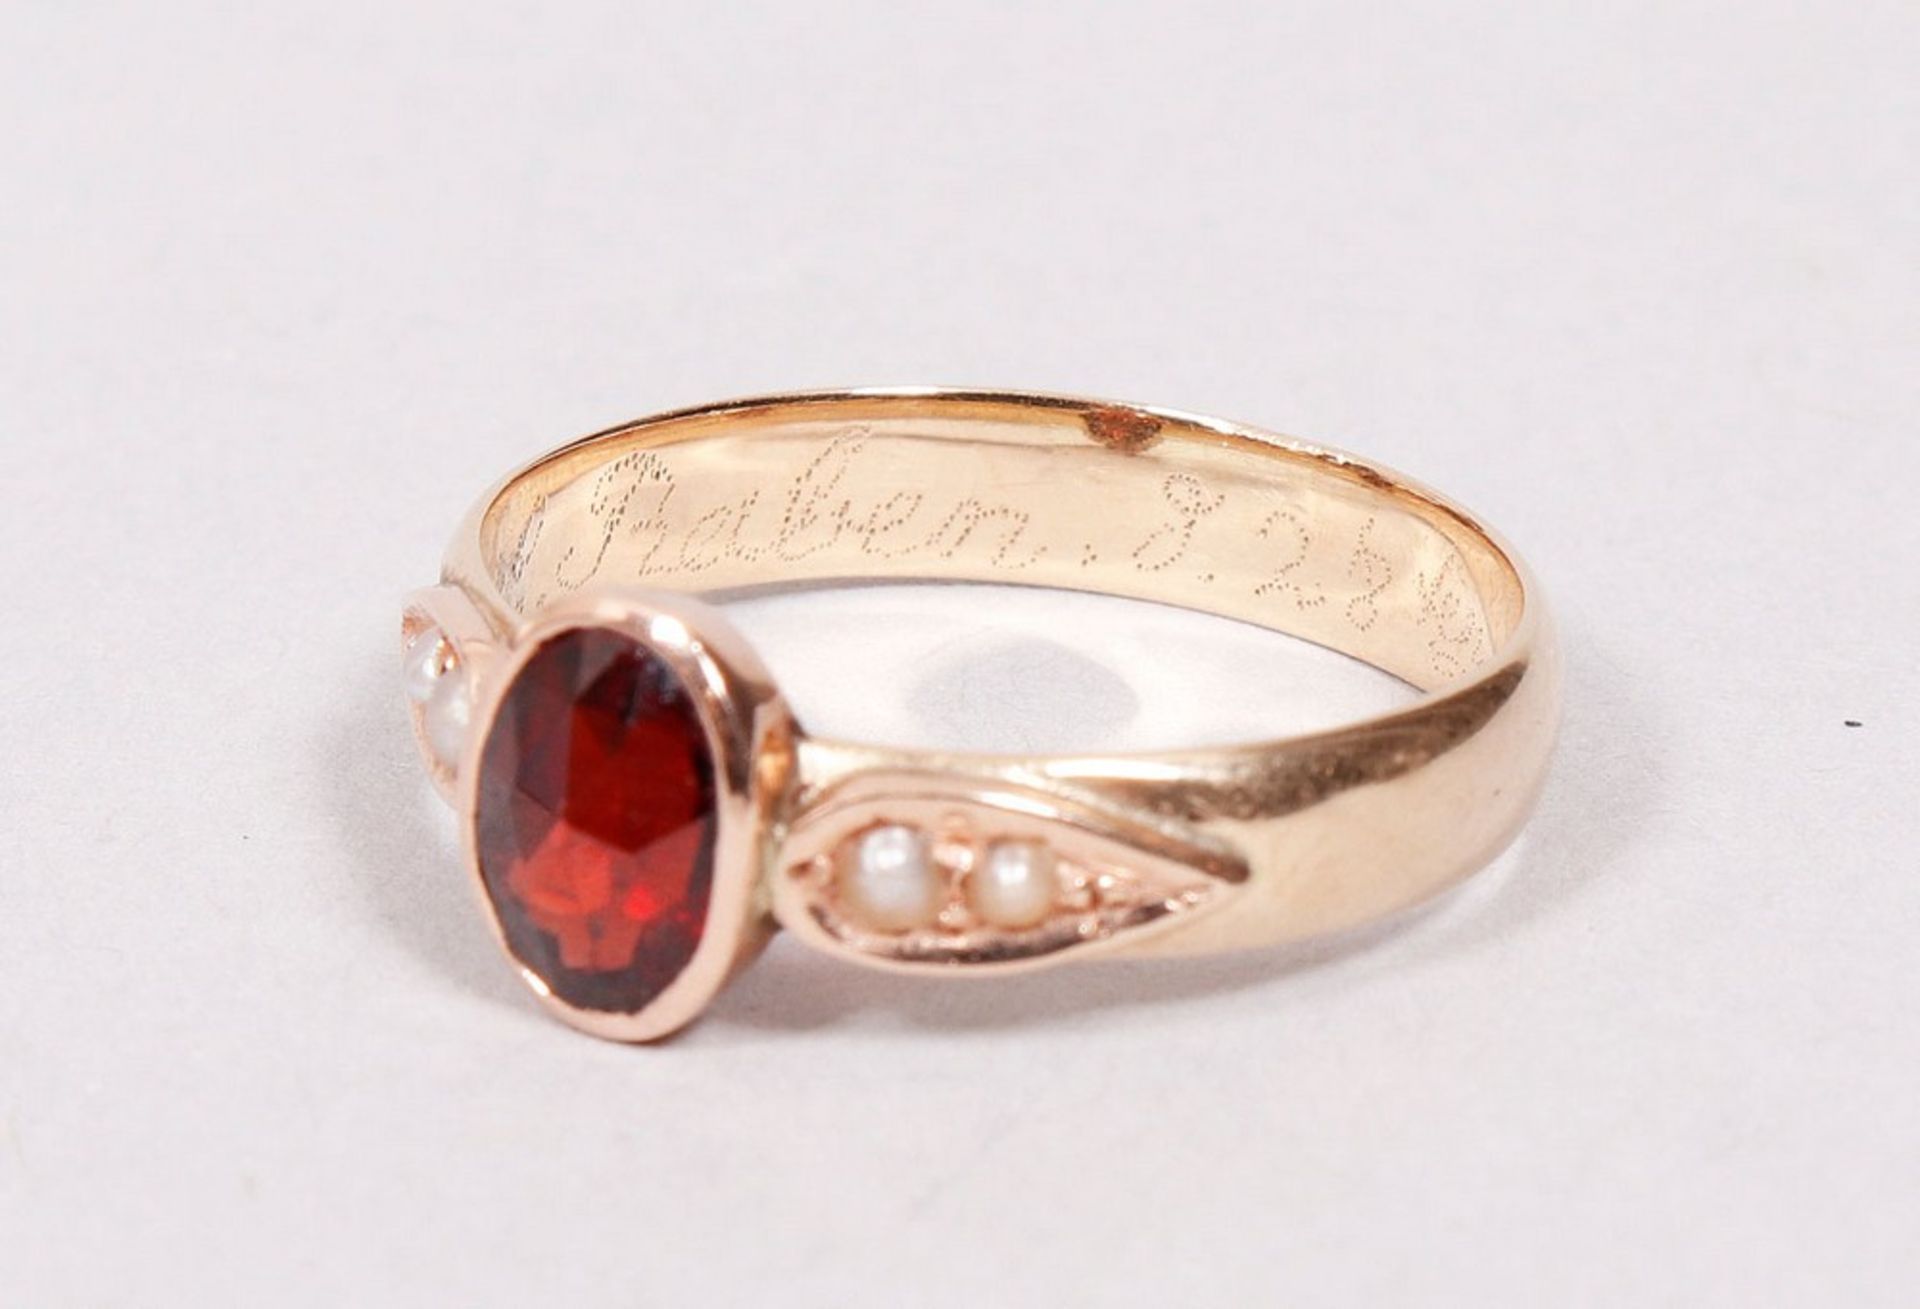 Ring, 585 red gold, set with an oval garnet stone - Image 3 of 3